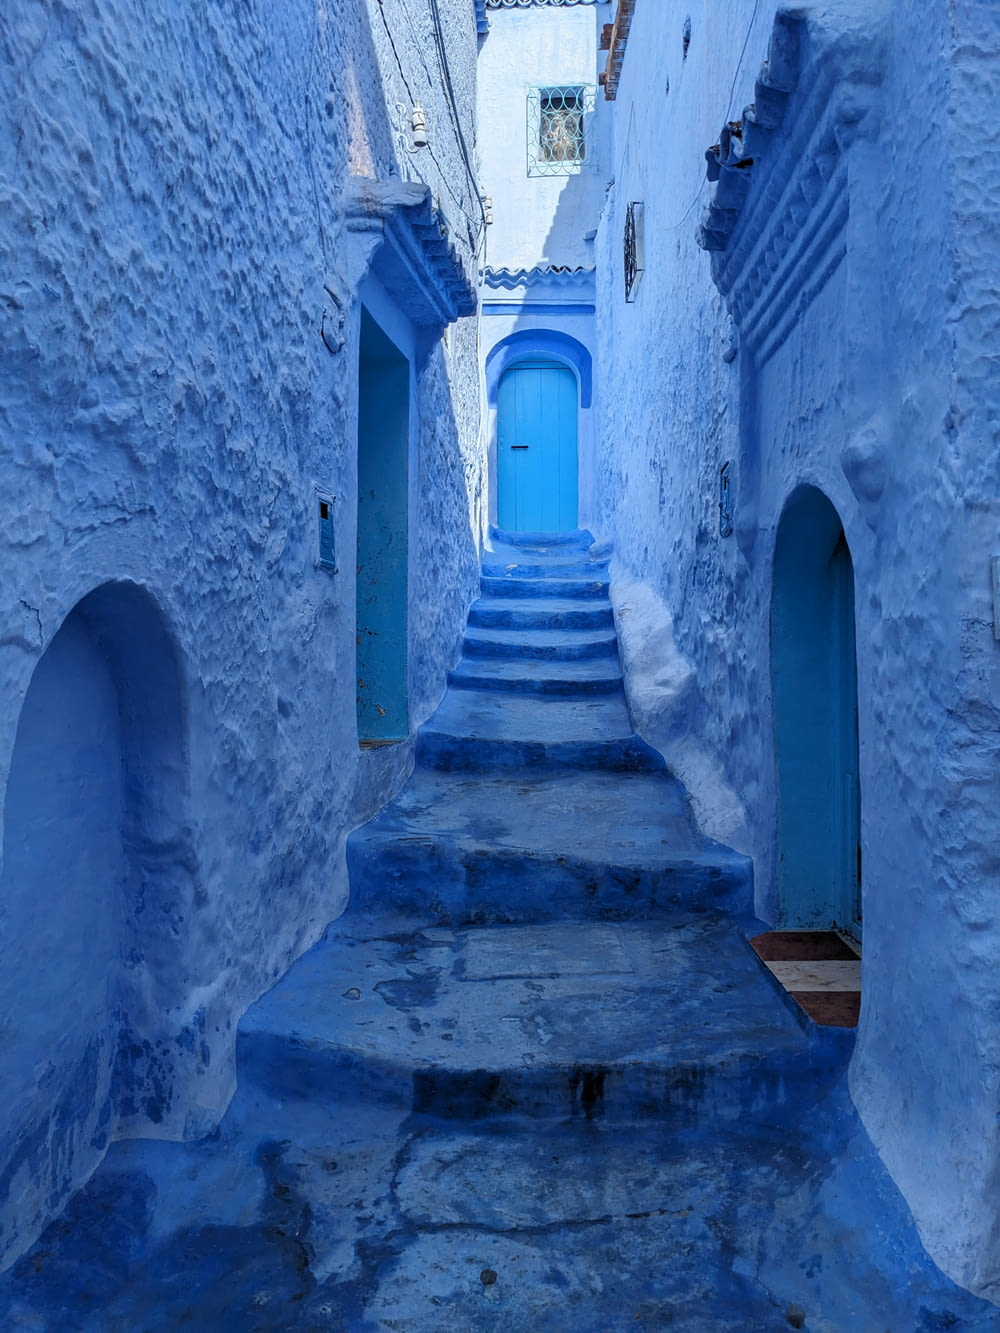 a narrow alleyway with blue painted walls and steps